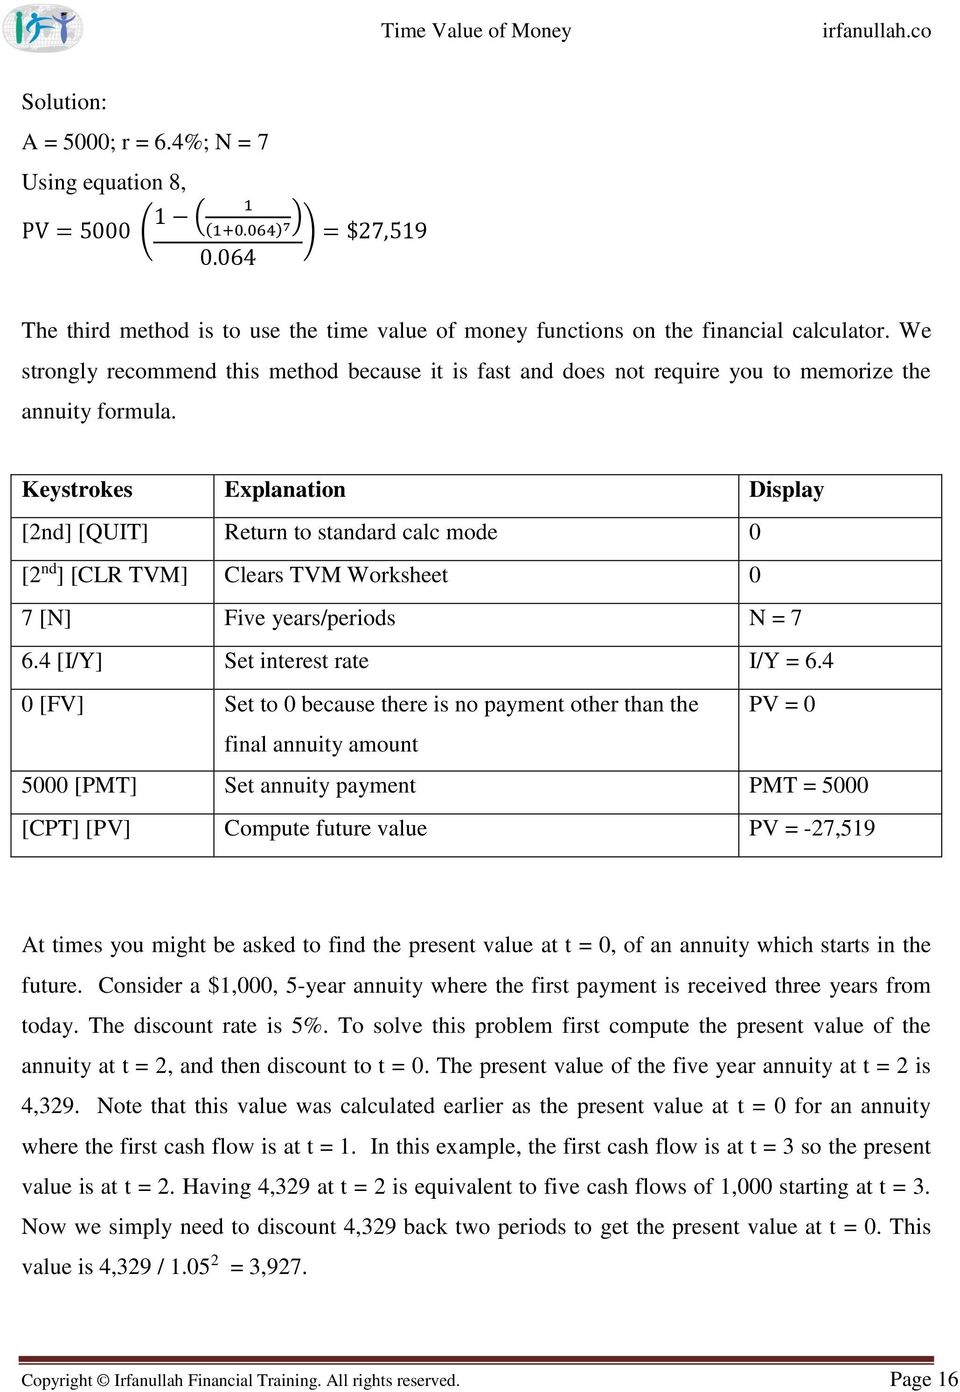 Keystrokes Explanation Display [2nd] [QUIT] Return to standard calc mode 0 [2 nd ] [CLR TVM] Clears TVM Worksheet 0 7 [N] Five years/periods N = 7 6.4 [I/Y] Set interest rate I/Y = 6.